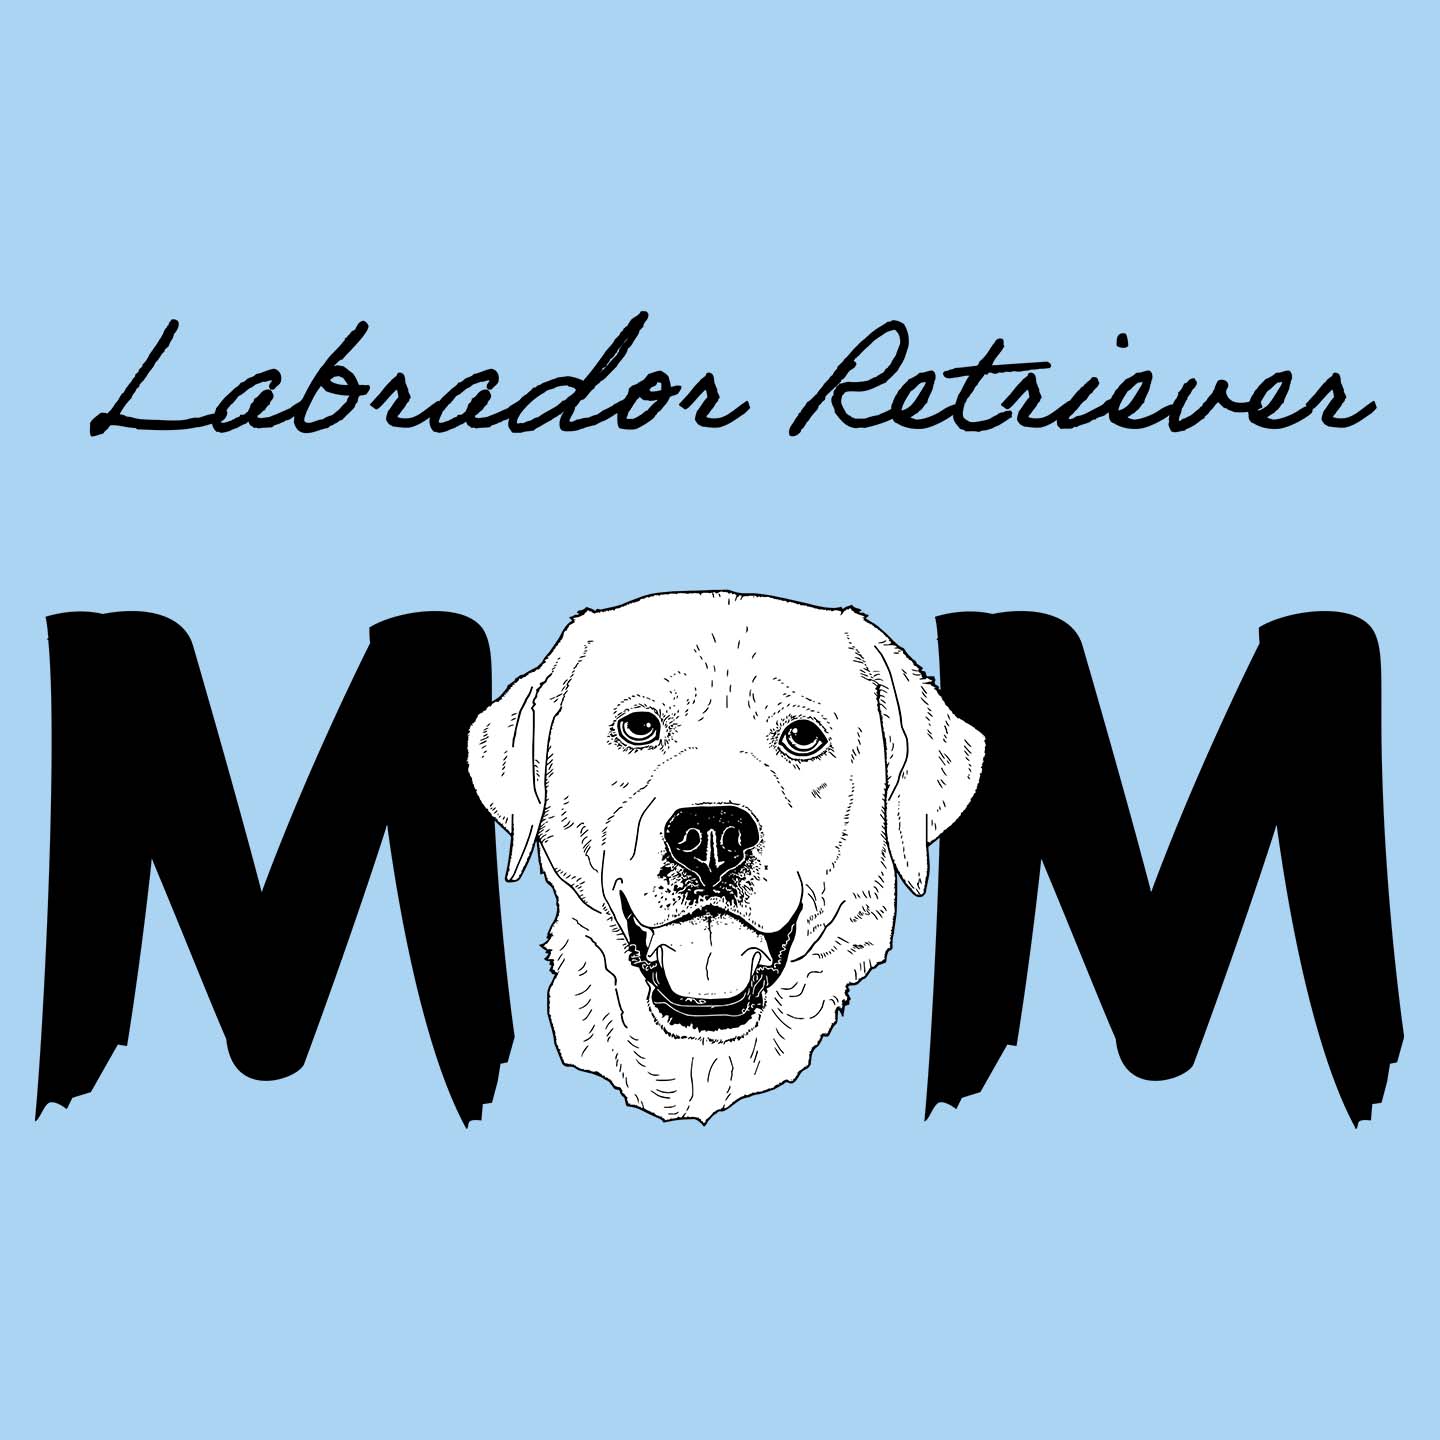 Yellow Labrador Breed Mom - Women's Fitted T-Shirt